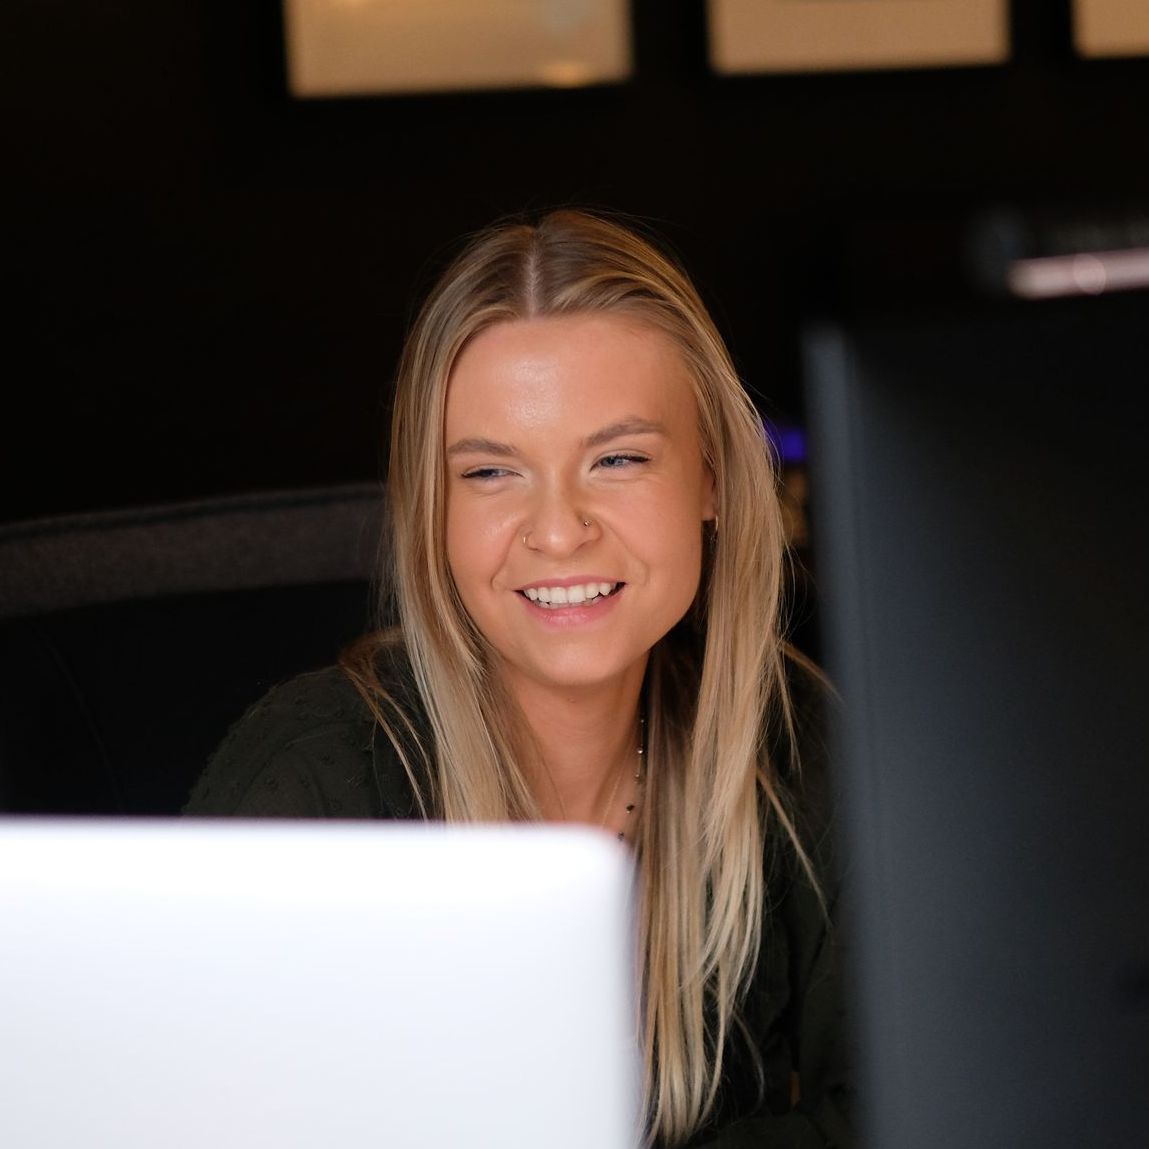 Headshot:  a young white woman with blond hair smiles into the corner of the room, sat behind a blurred out computer screen in the foreground.